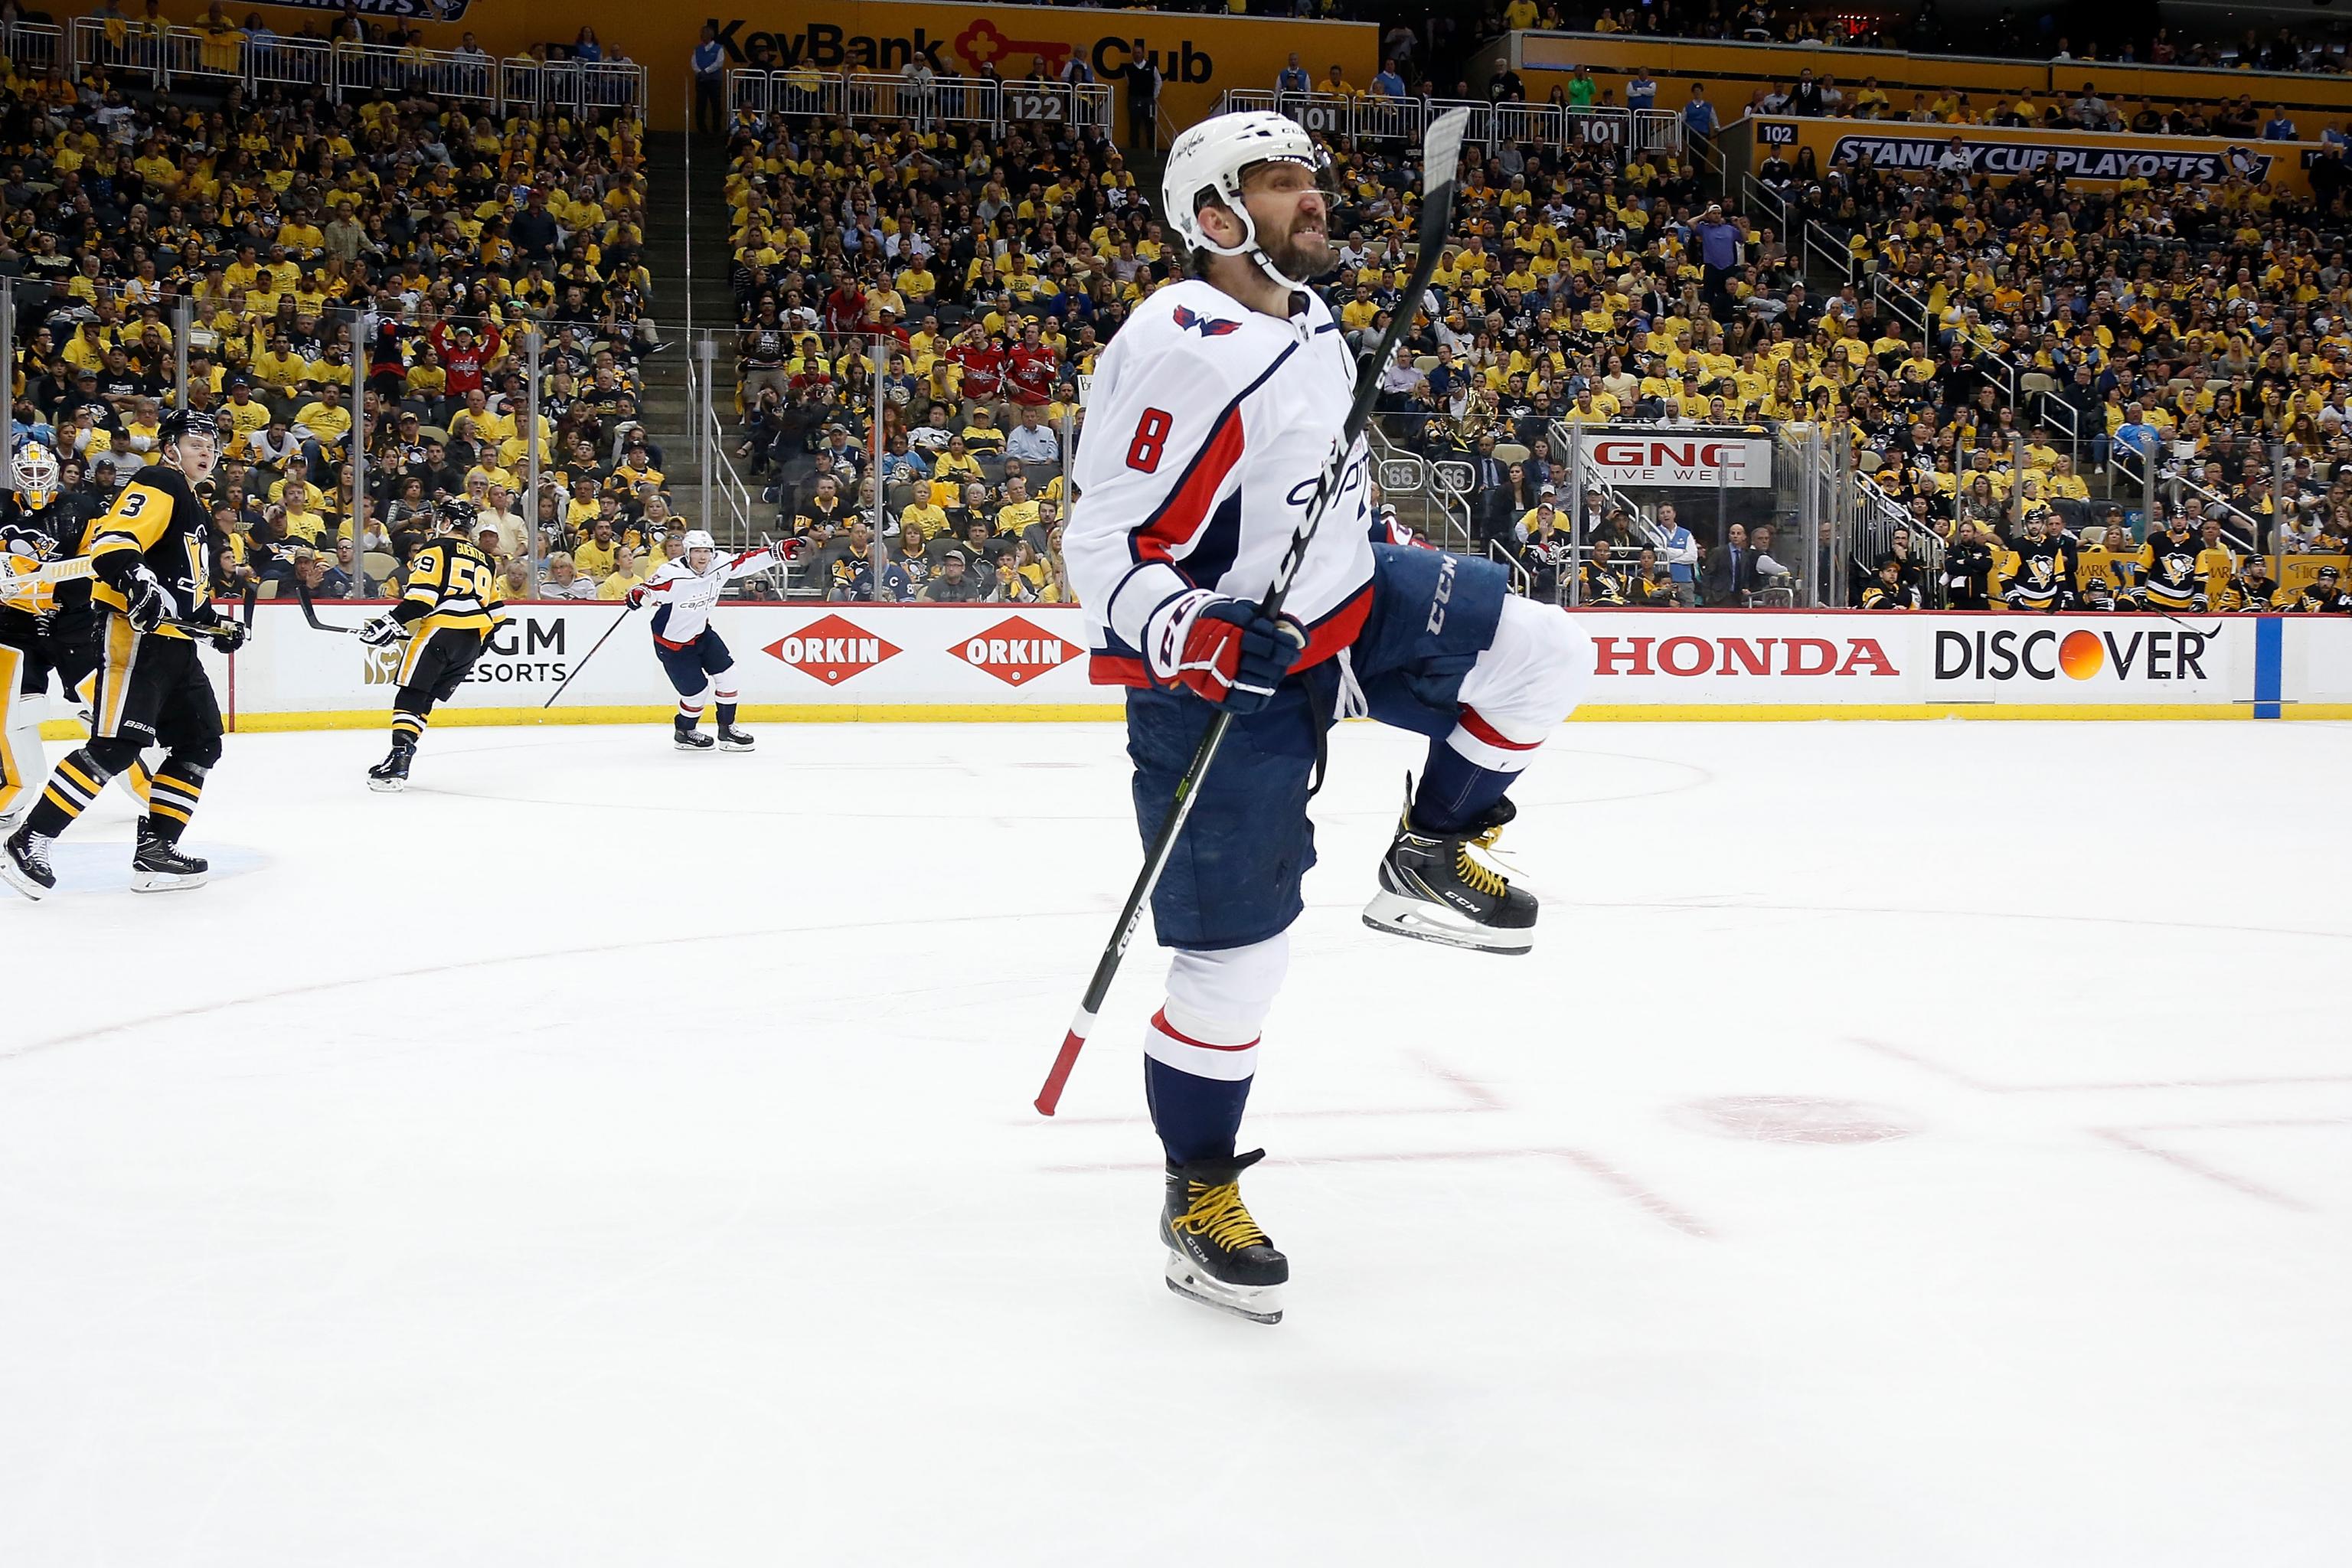 Ovechkin And Crosby Stanley Cup Playoff Streaks Broken Capitals Vs